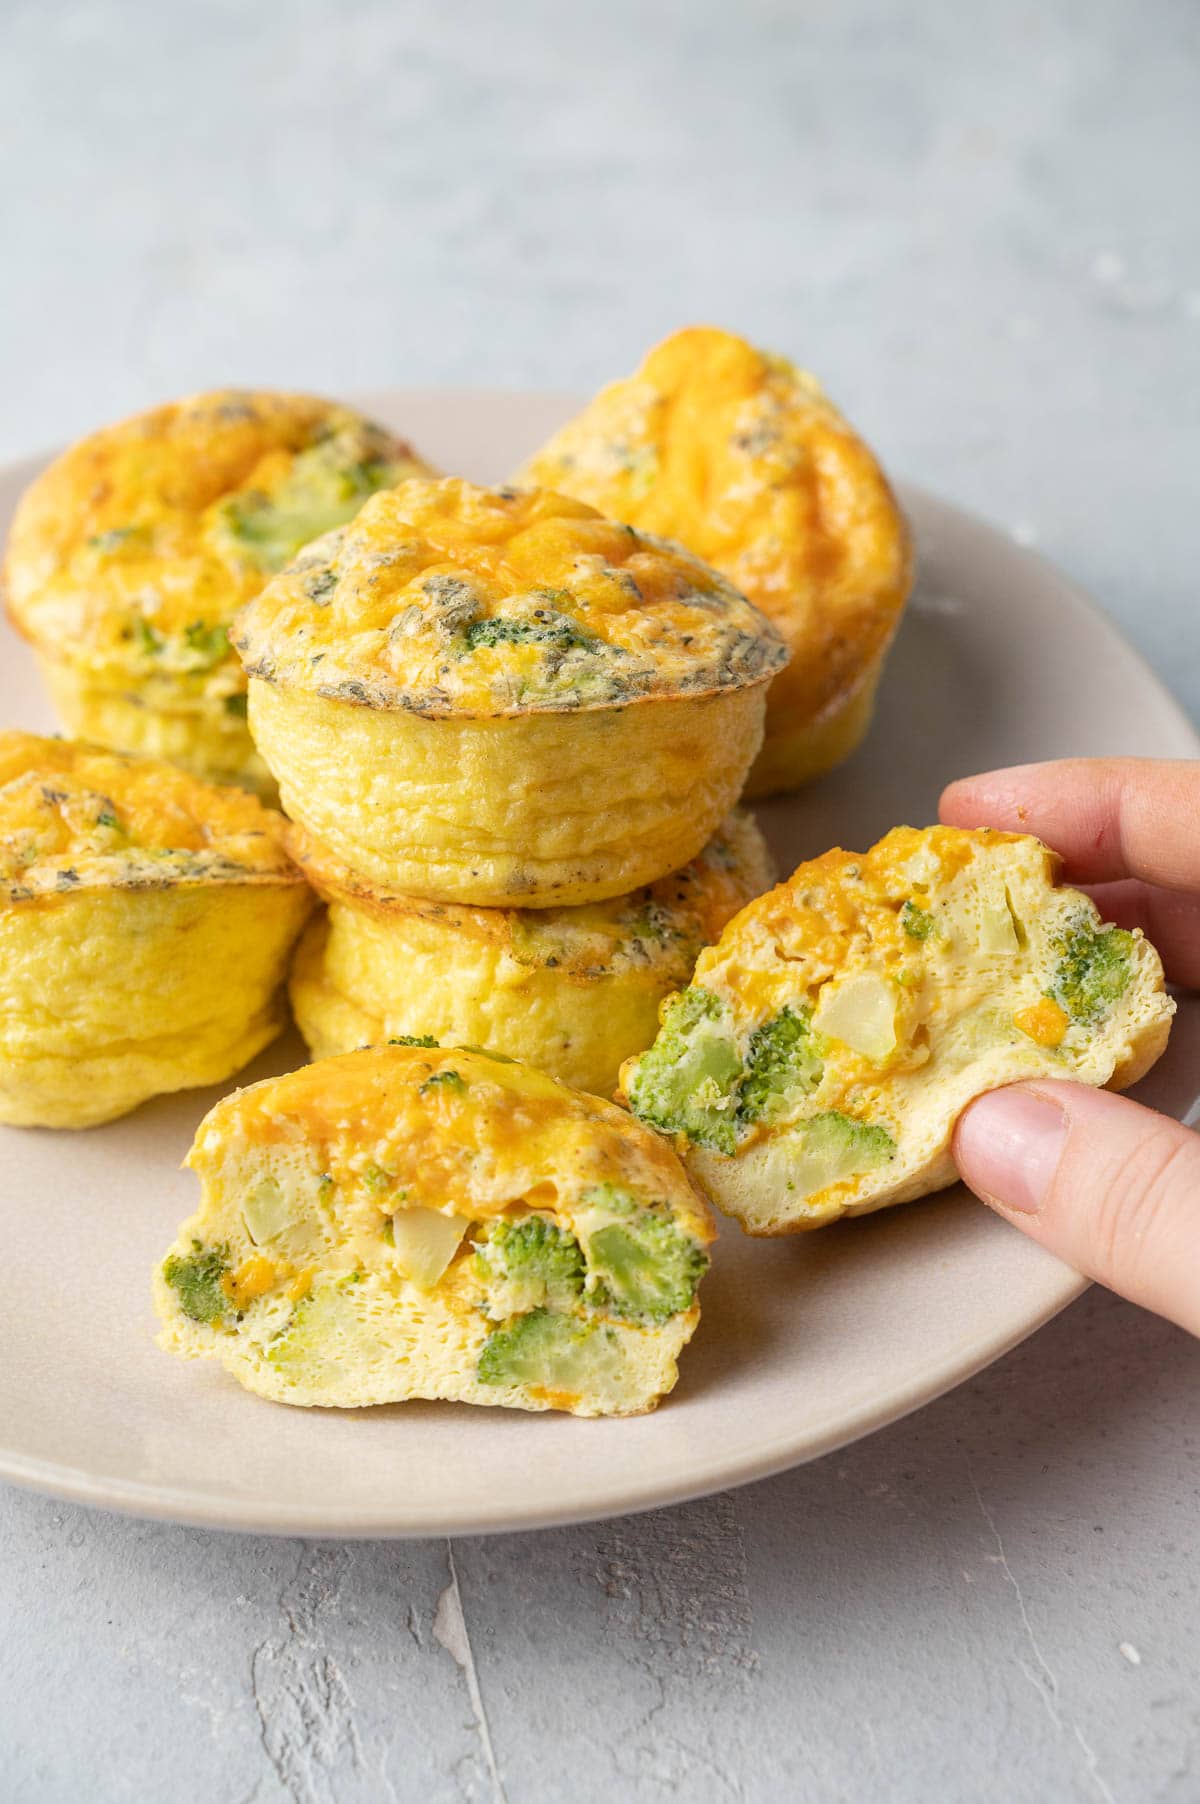 https://www.everyday-delicious.com/wp-content/uploads/2022/03/broccoli-cheddar-egg-muffins-everyday-delicious-1.jpg